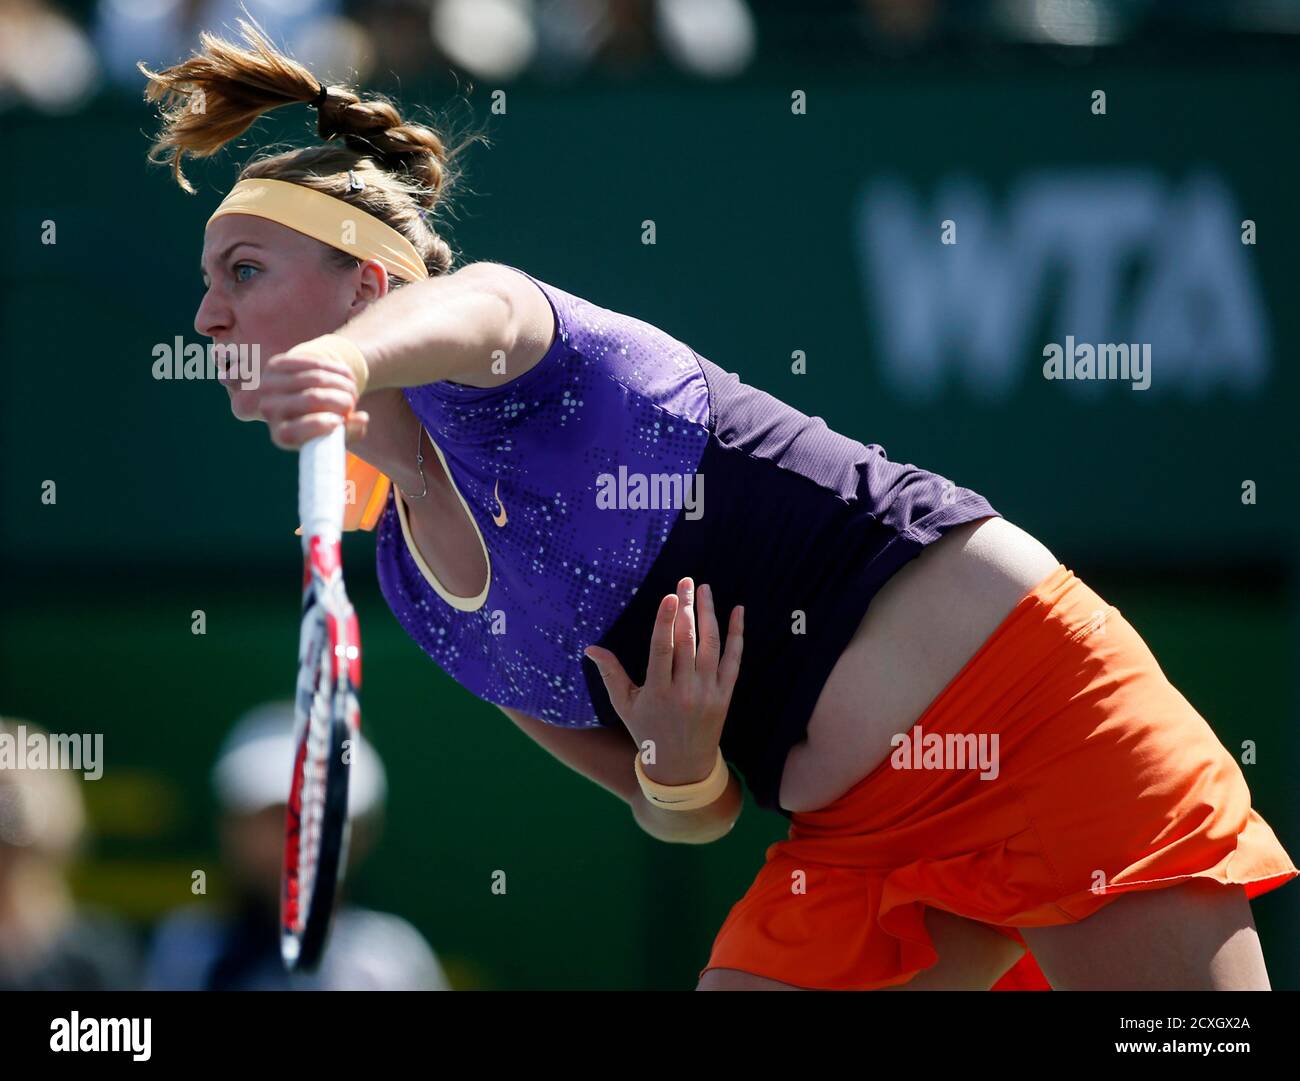 Petra Kvitova of the Czech Republic serves against Olga Govortsova of  Belarus during their match at the BNP Paribas Open WTA tennis tournament in  Indian Wells, California, March 8, 2013. REUTERS/Danny Moloshok (